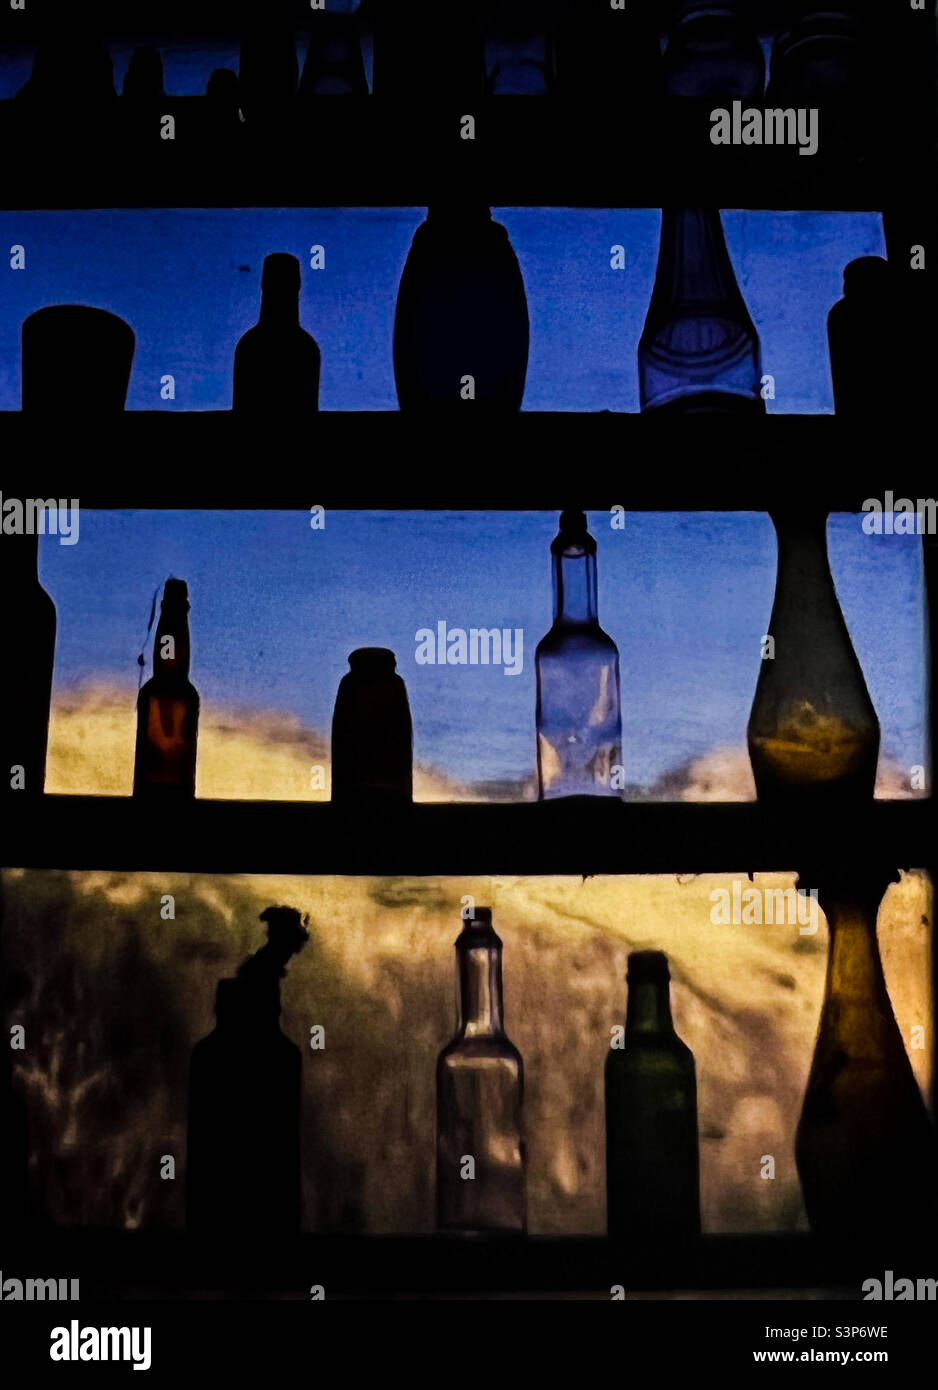 Antique Glass Bottles in window Northern California Route 1 Stock Photo